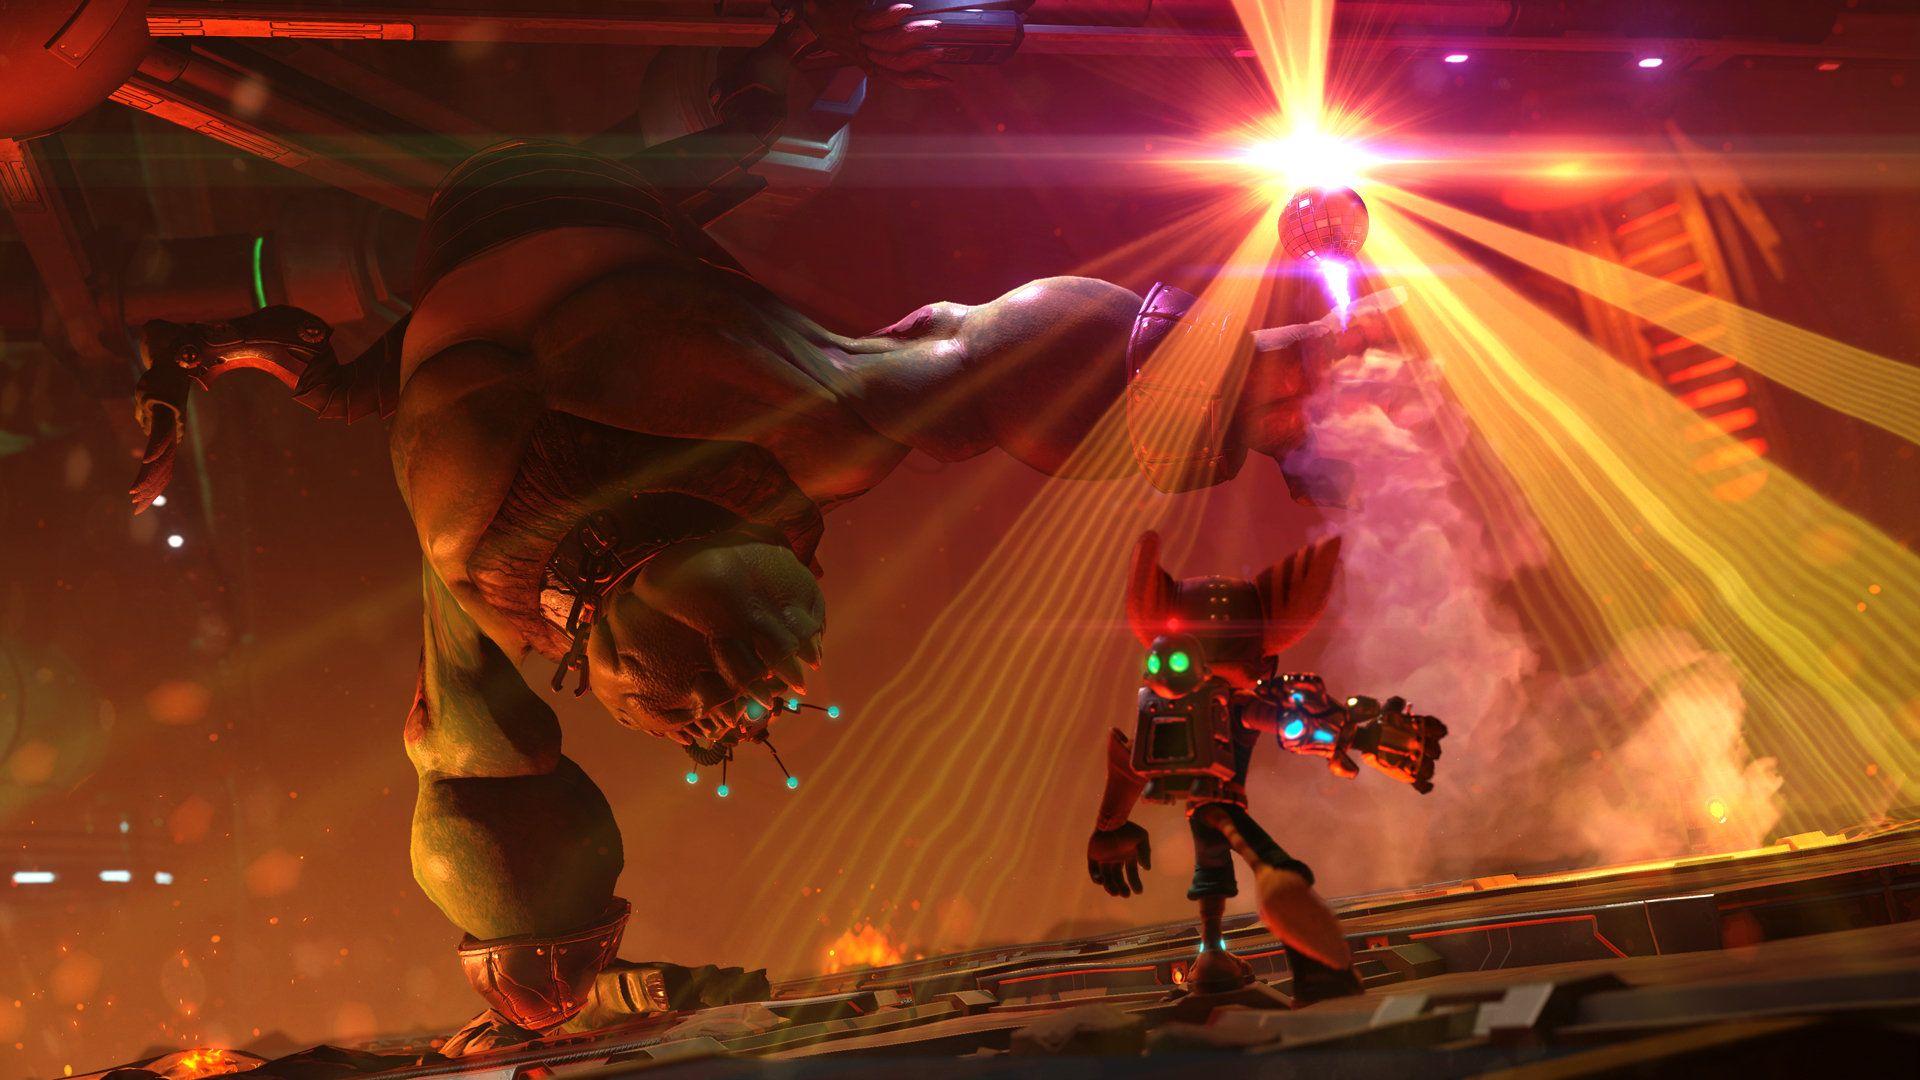 Ratchet & Clank PS4 New Footage; Releases April 12